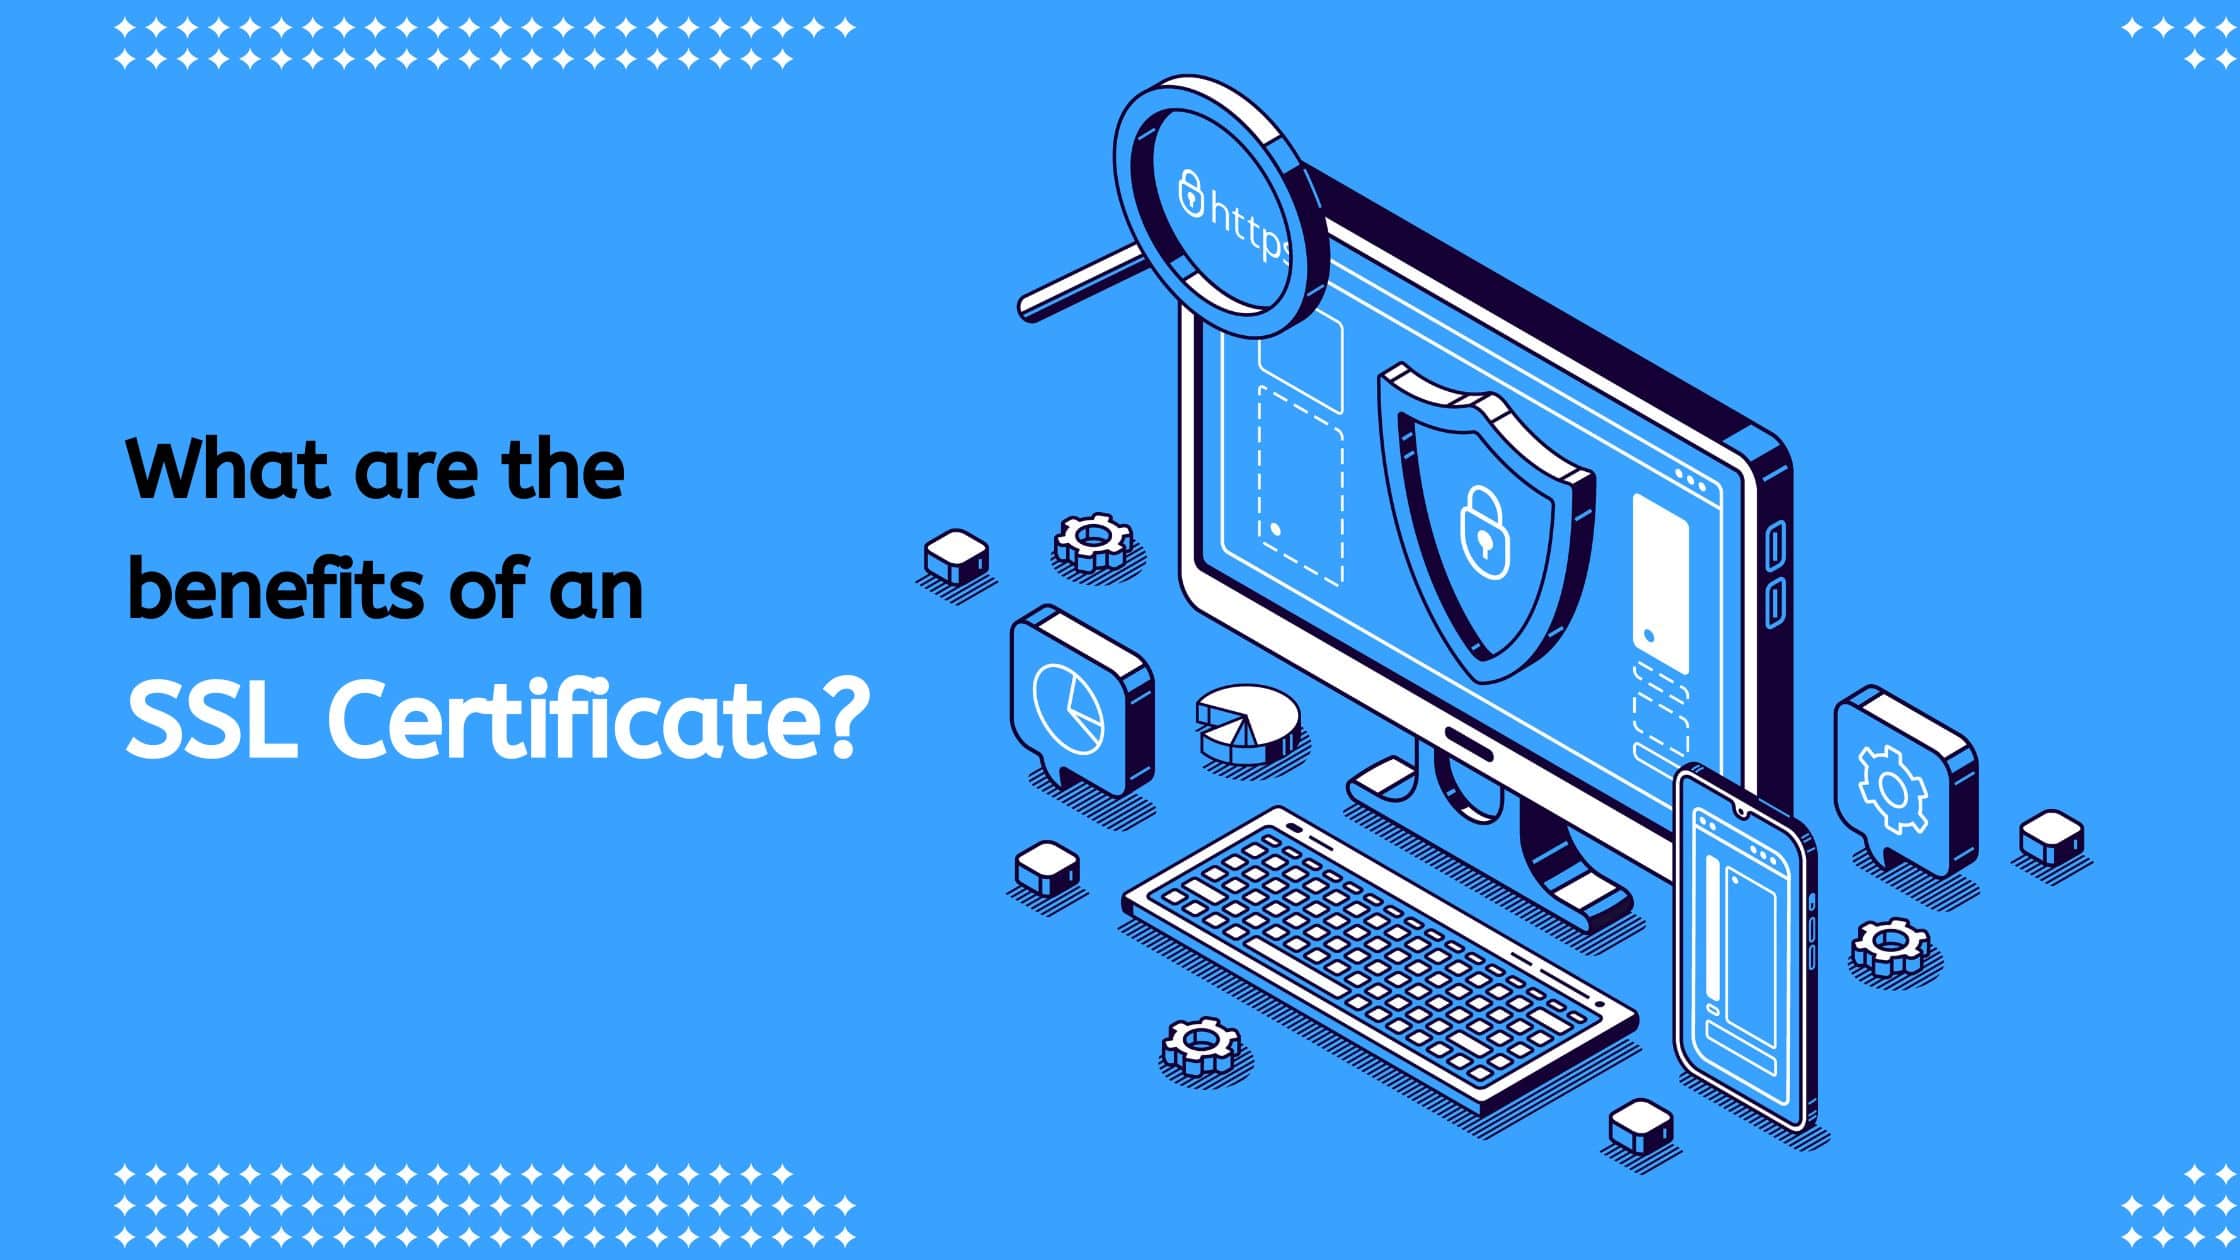 What Are The Benefits Of An SSL Certificate?